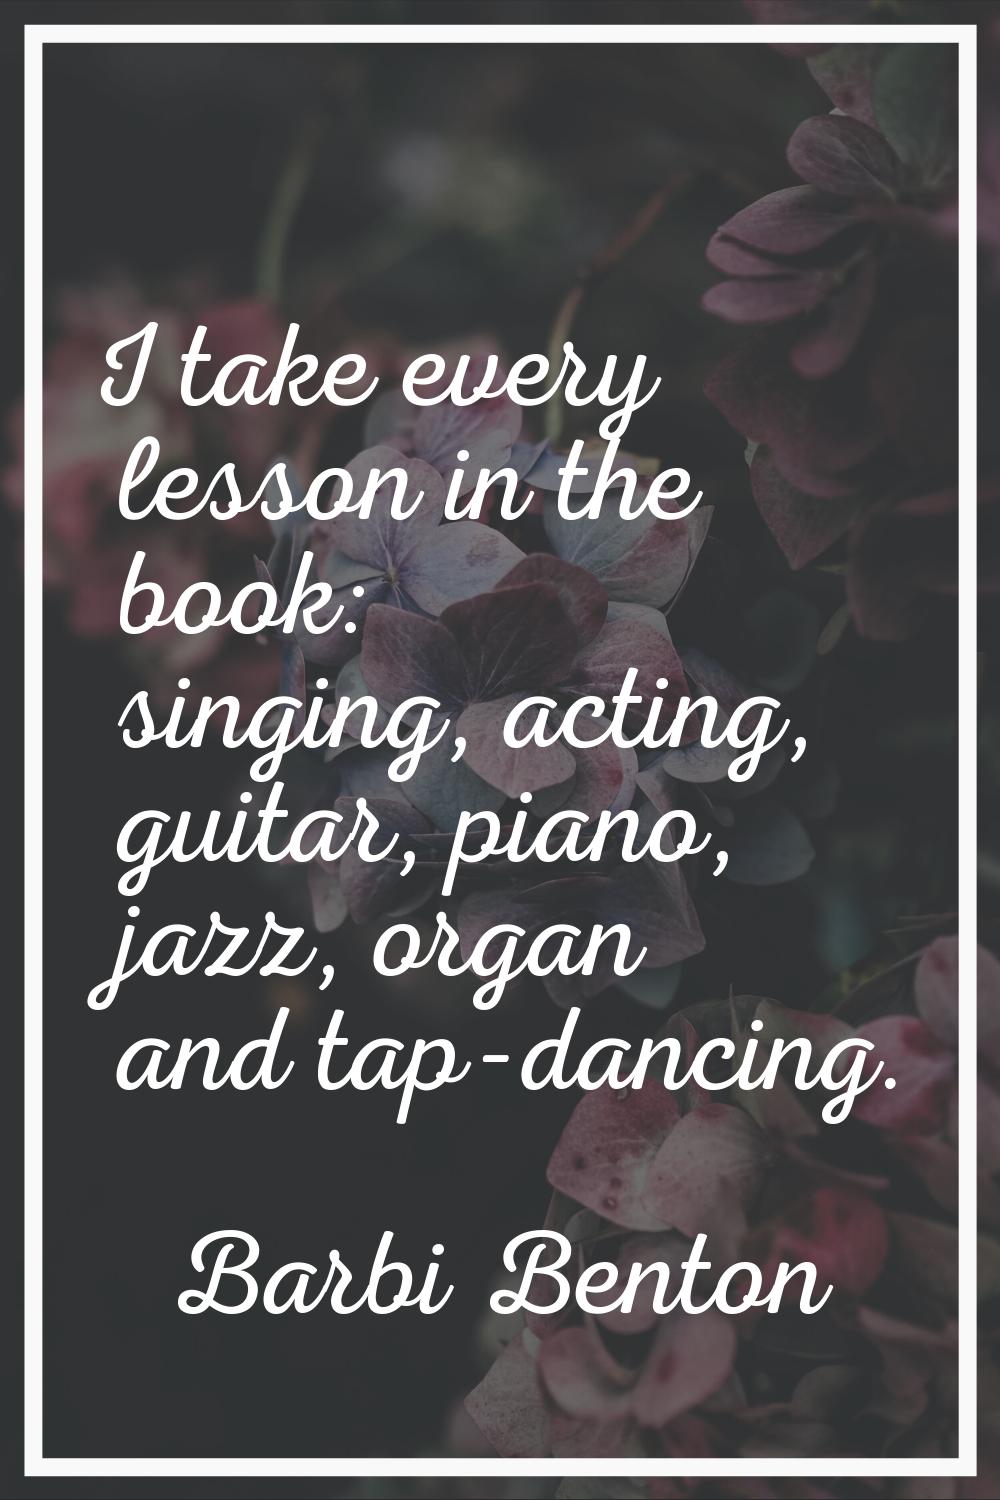 I take every lesson in the book: singing, acting, guitar, piano, jazz, organ and tap-dancing.